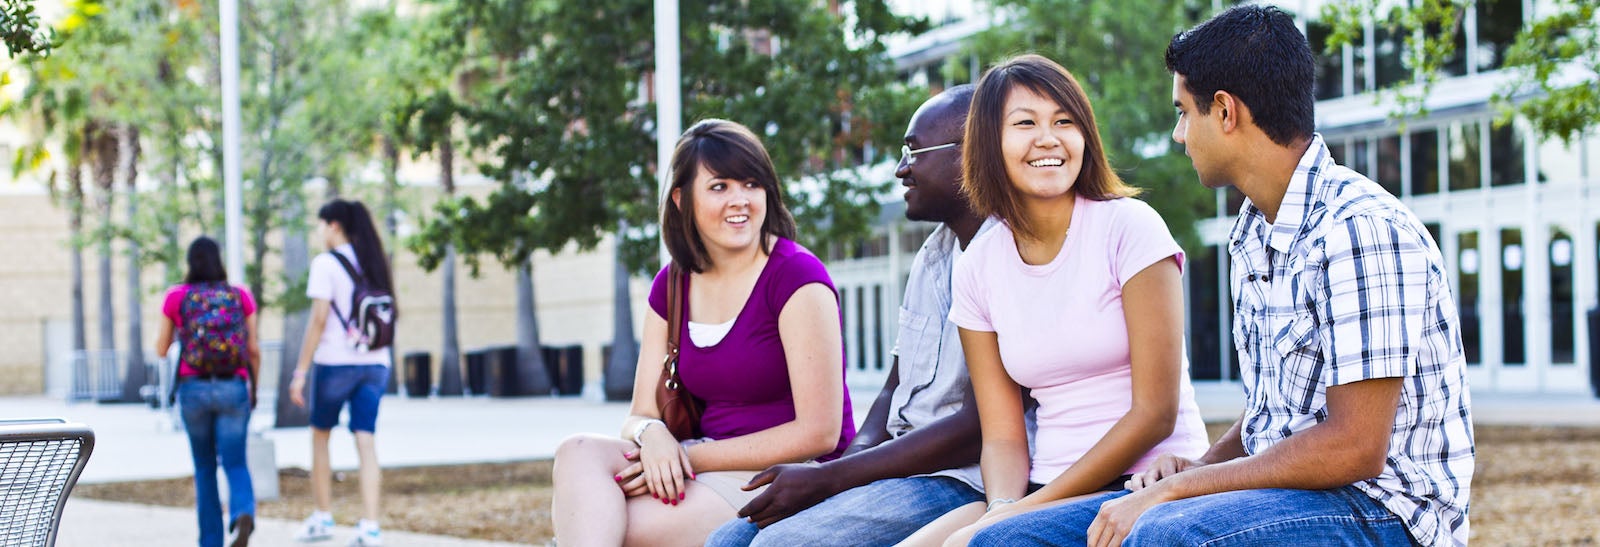 ucf students sitting on bench while chatting